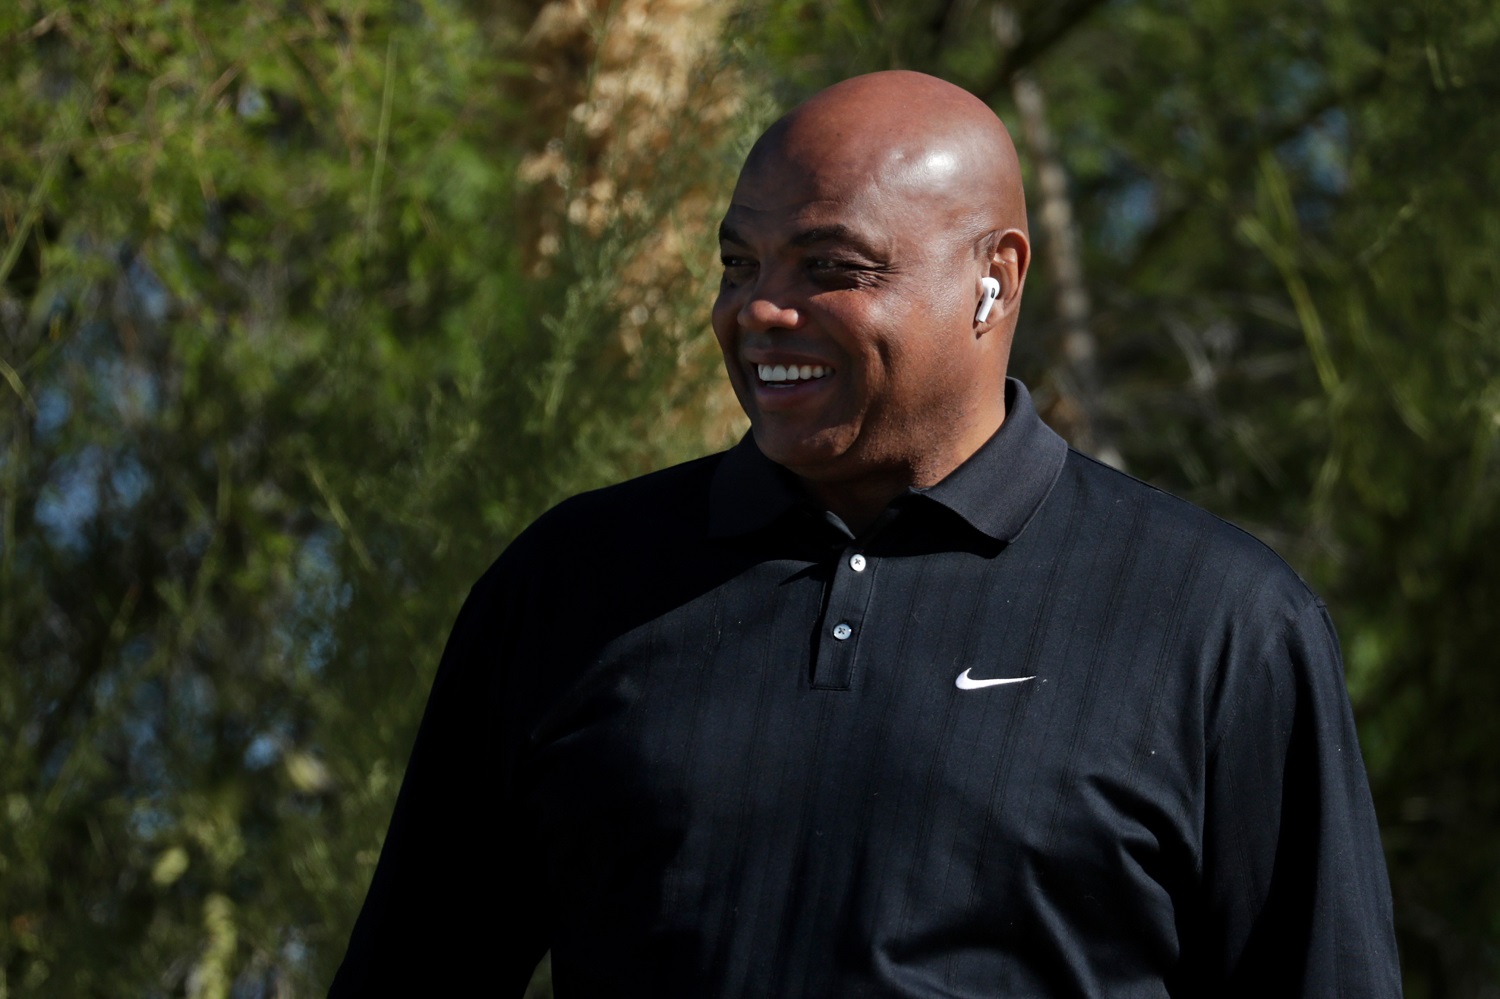 Charles Barkley missed the 2021 NBA ALl-Star Game to attend his daughter's wedding.